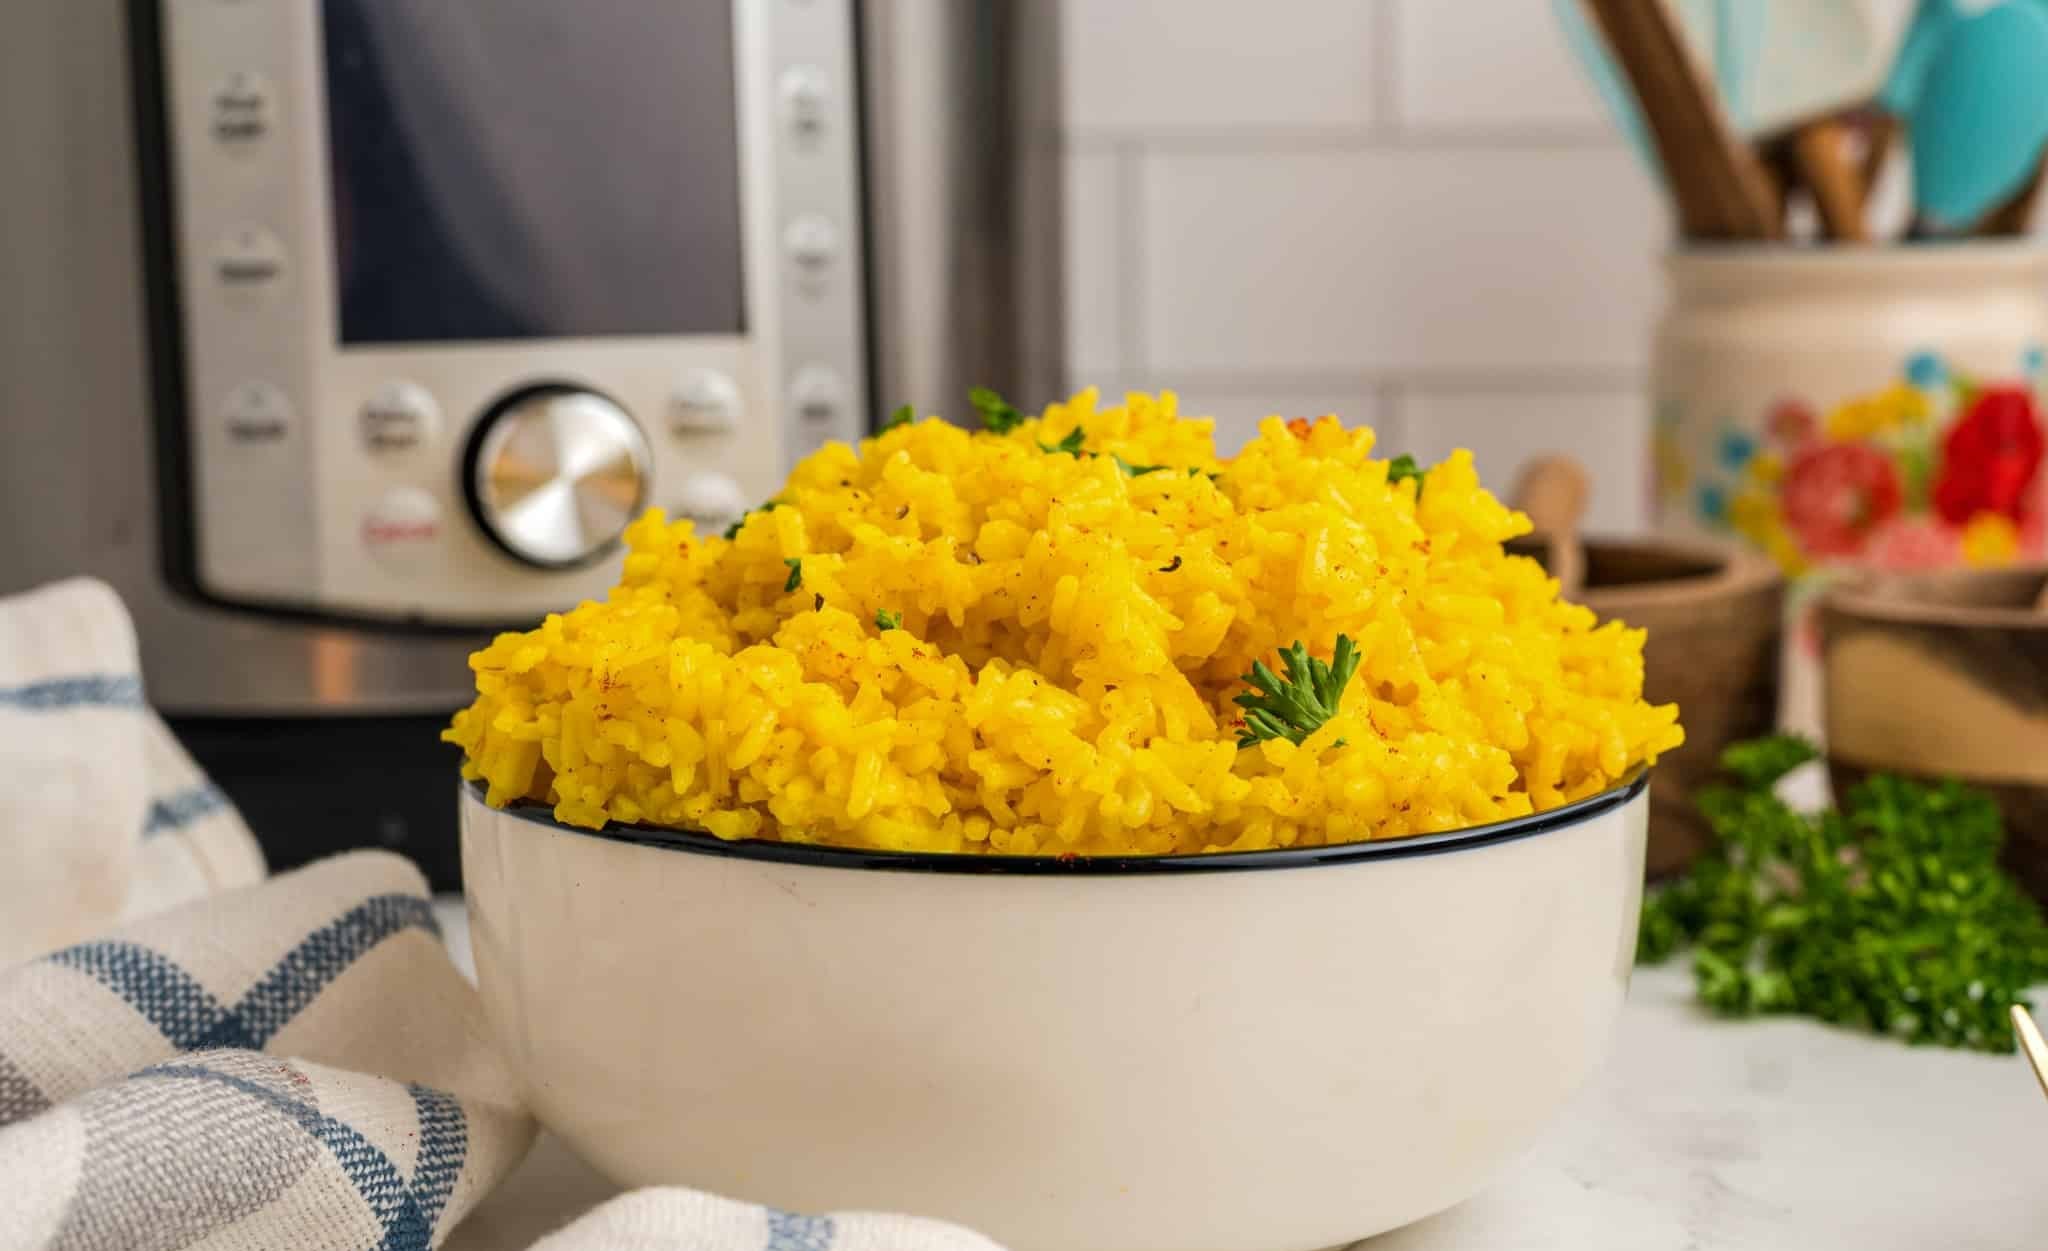 How To Make Par Excellence Yellow Rice Saffron In Electric Pressure Cooker